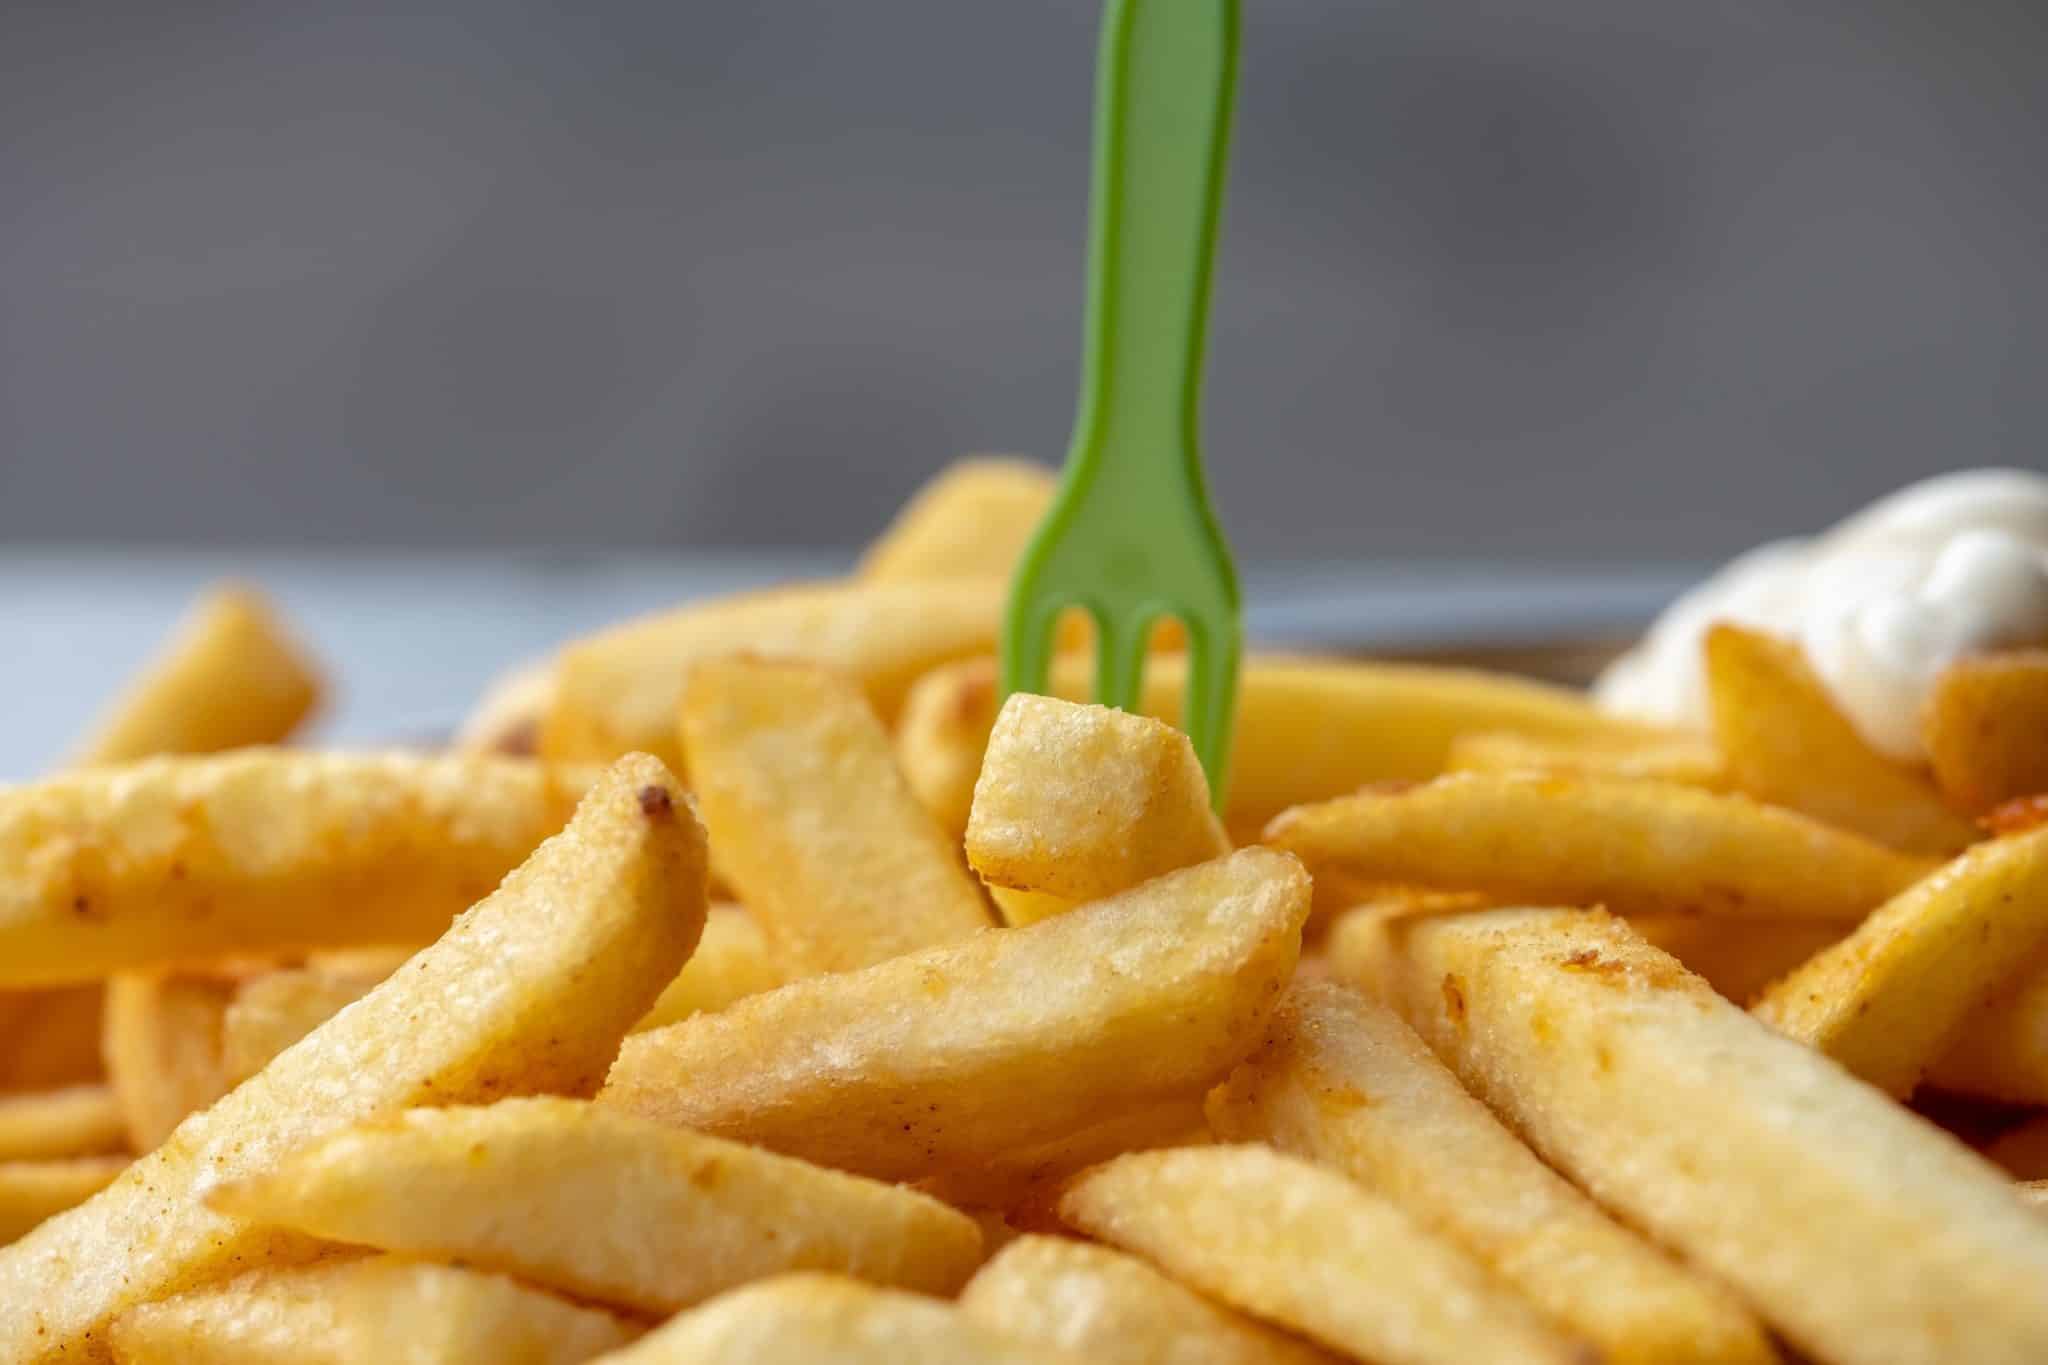 Close up of french fries on a plate